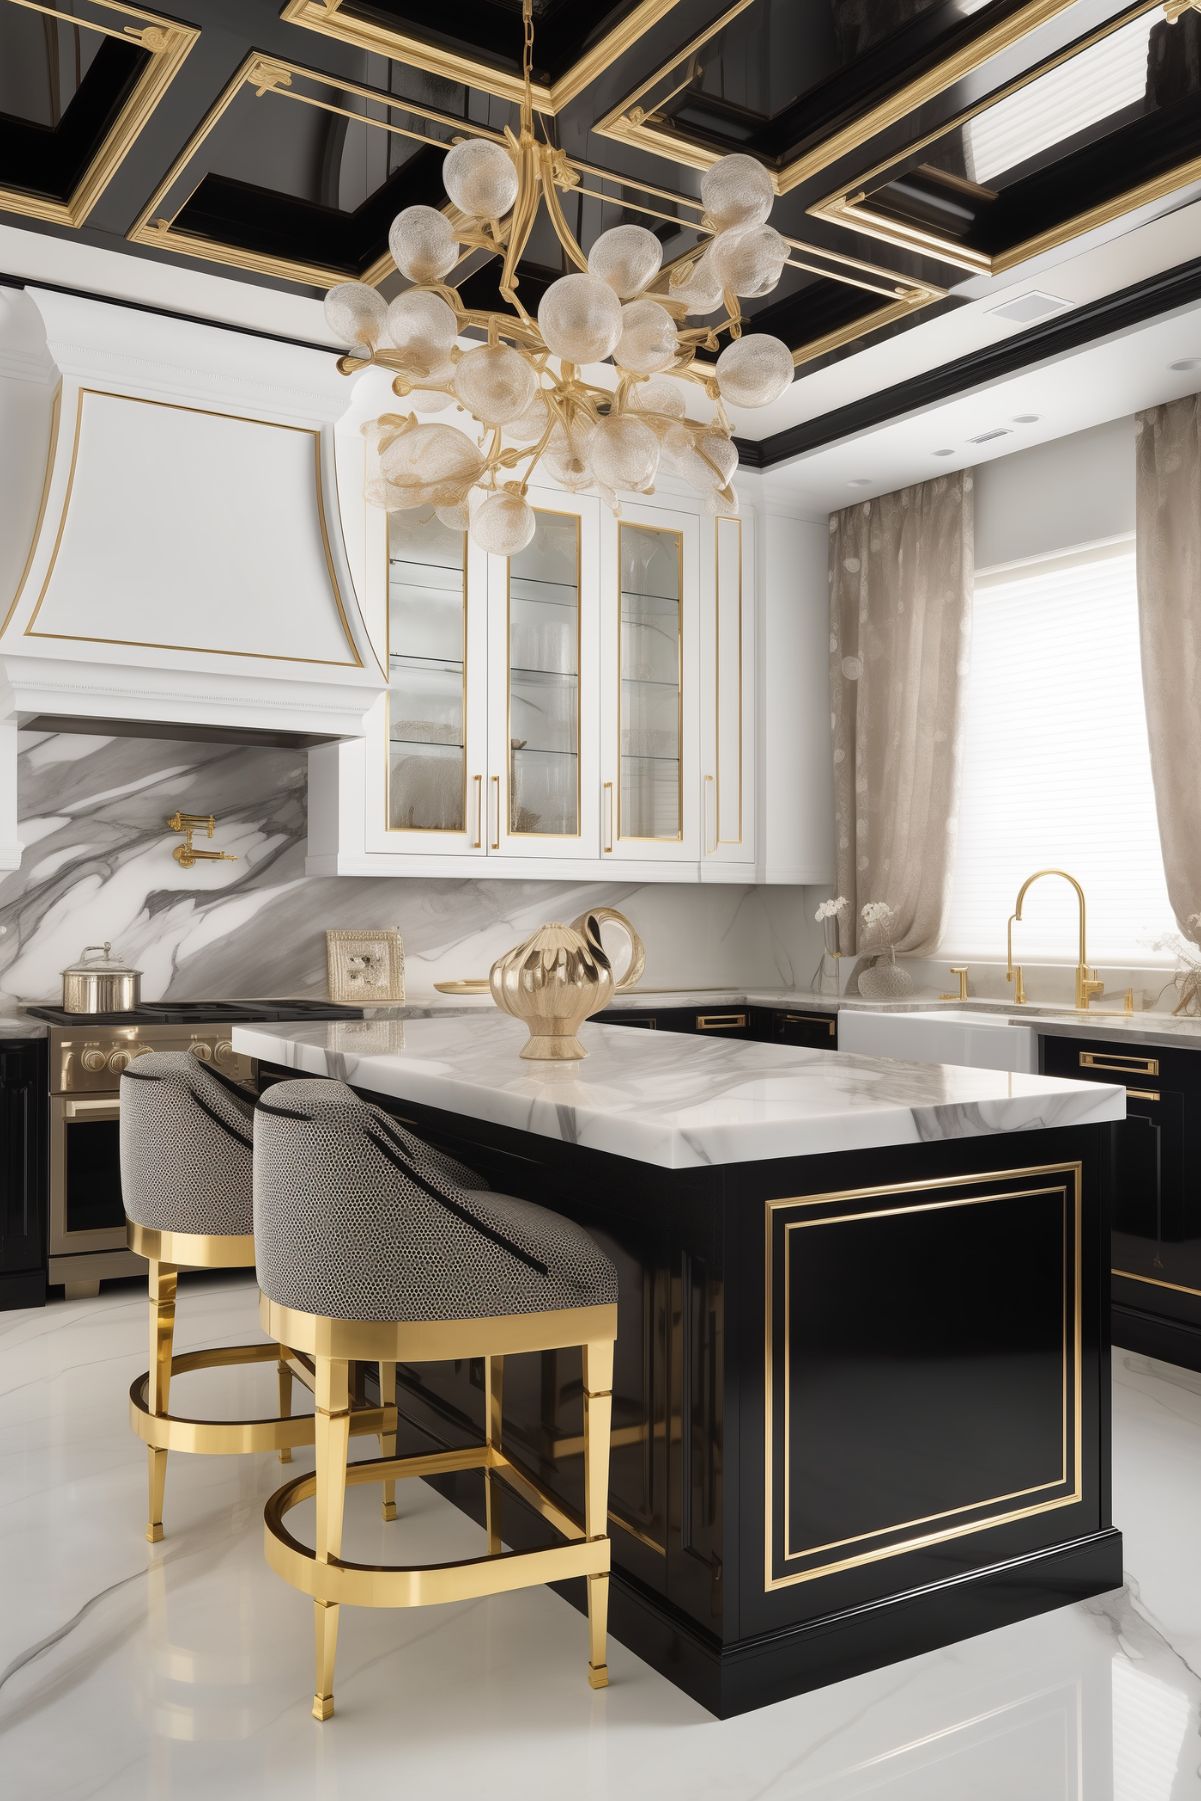 Luxurious kitchen featuring black, white, and gold accents with a marble island, elegant chandelier, and plush barstools.